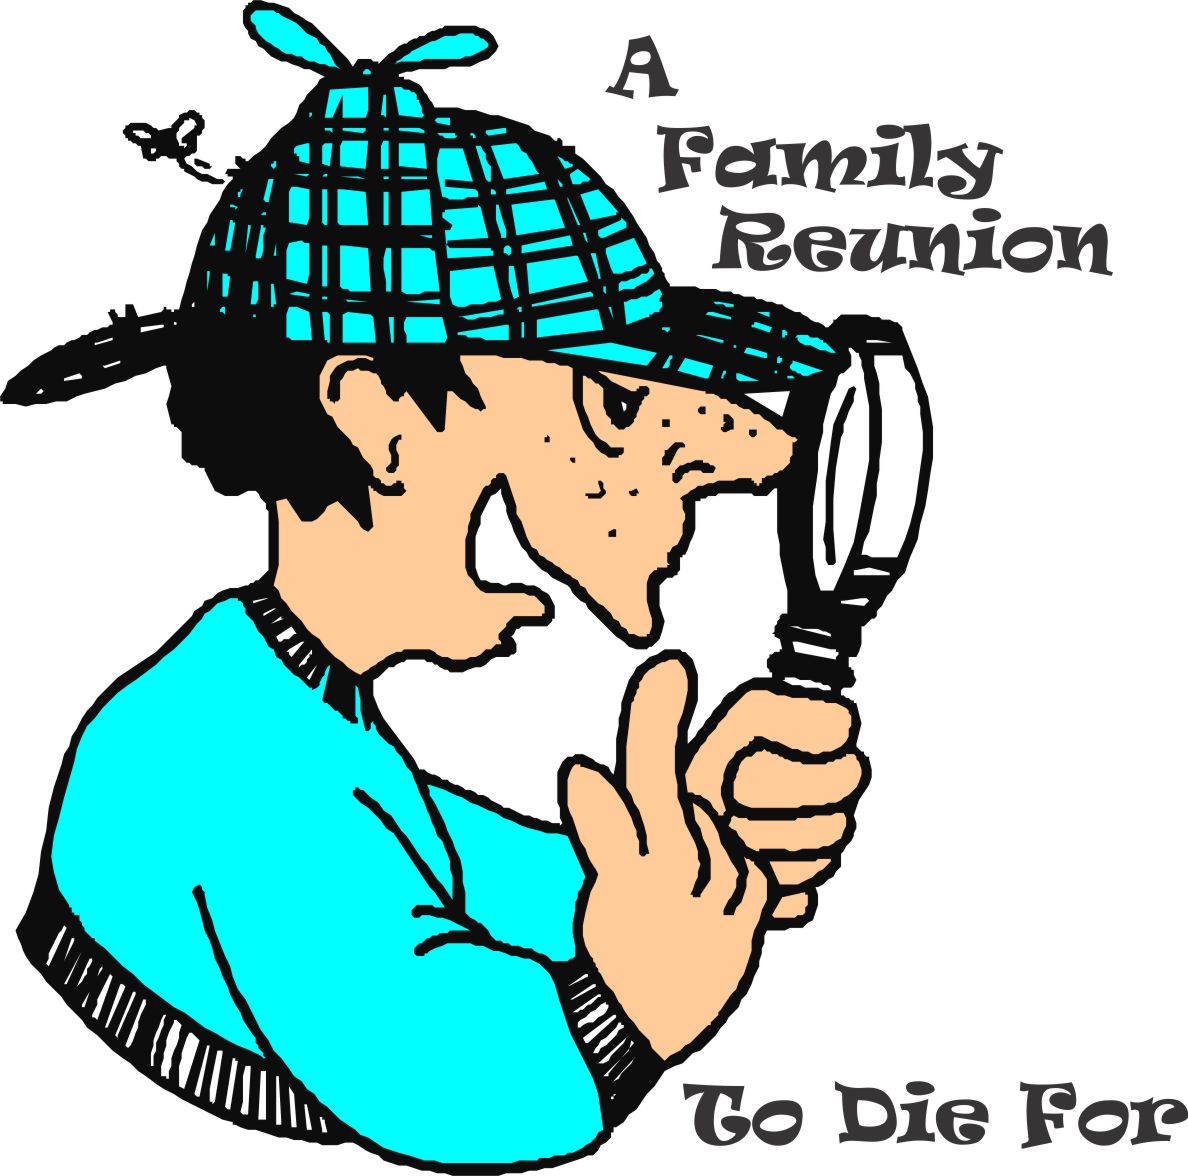 family reunion clipart images - photo #42